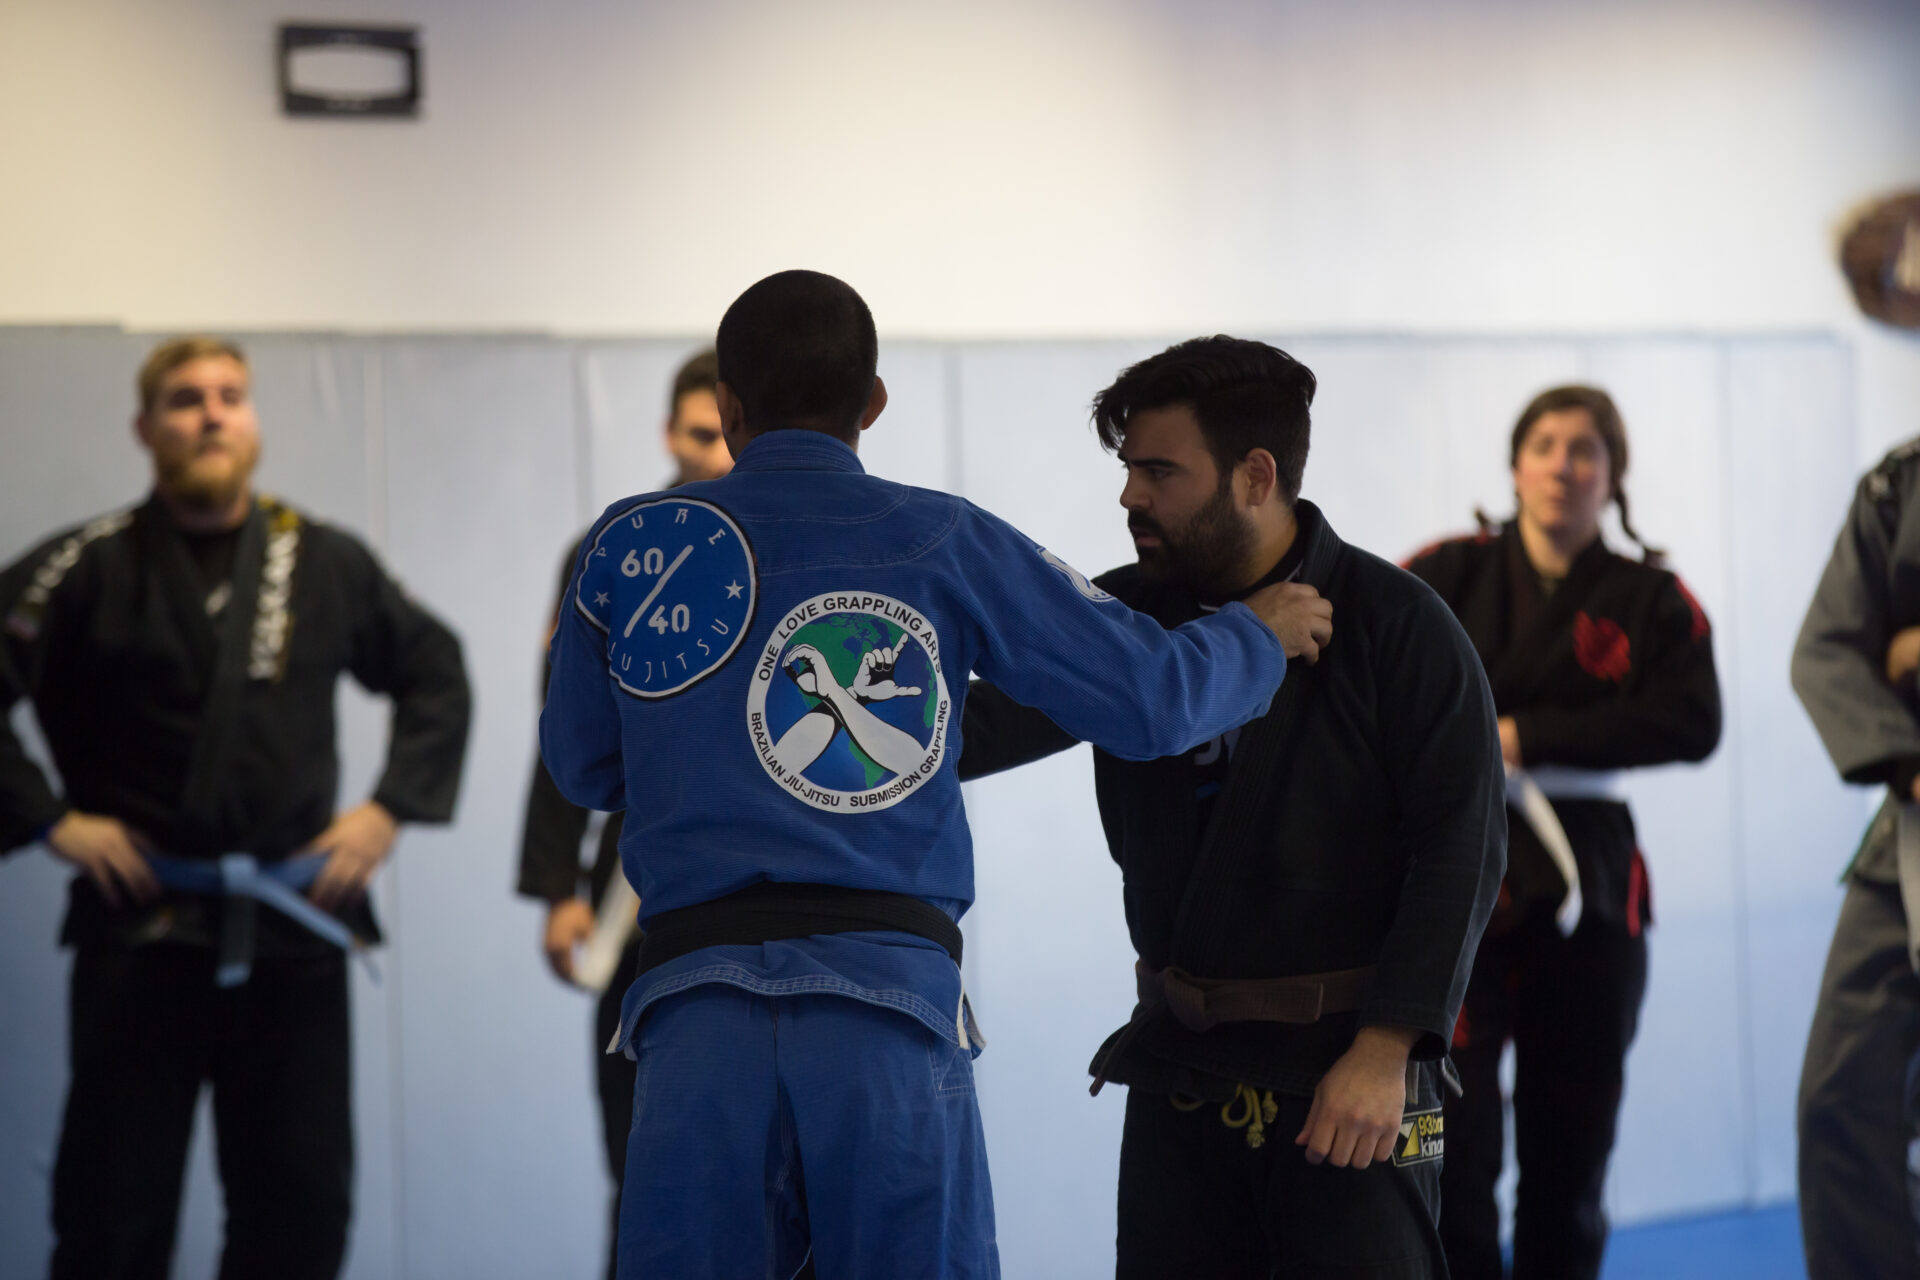 A man in blue and black uniform getting ready to do a judo move.